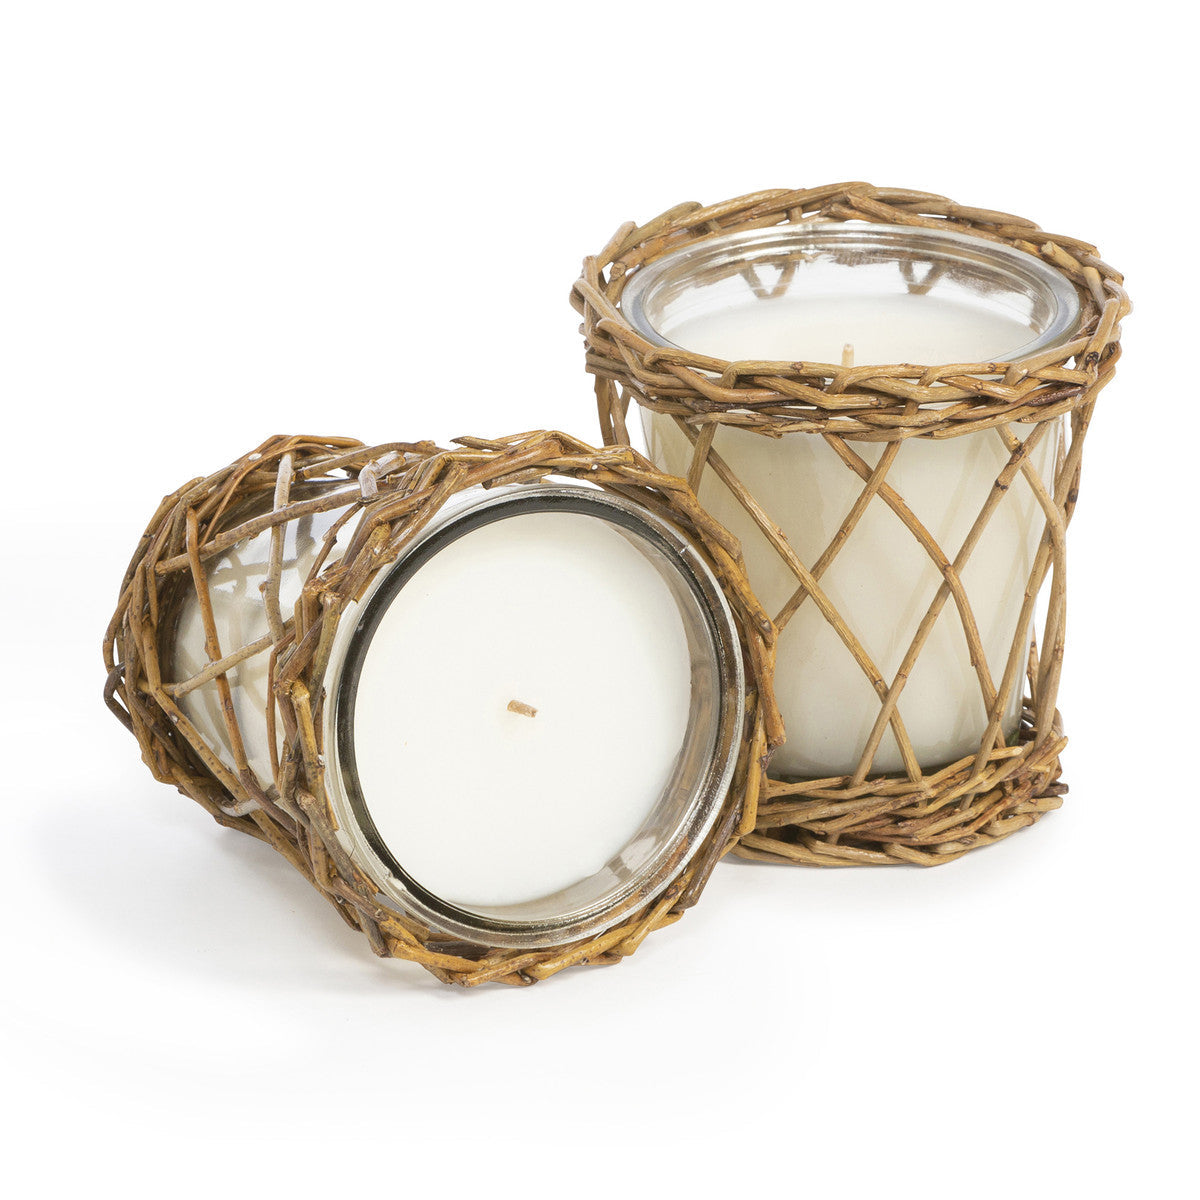 Country French Lavender Willow Candle